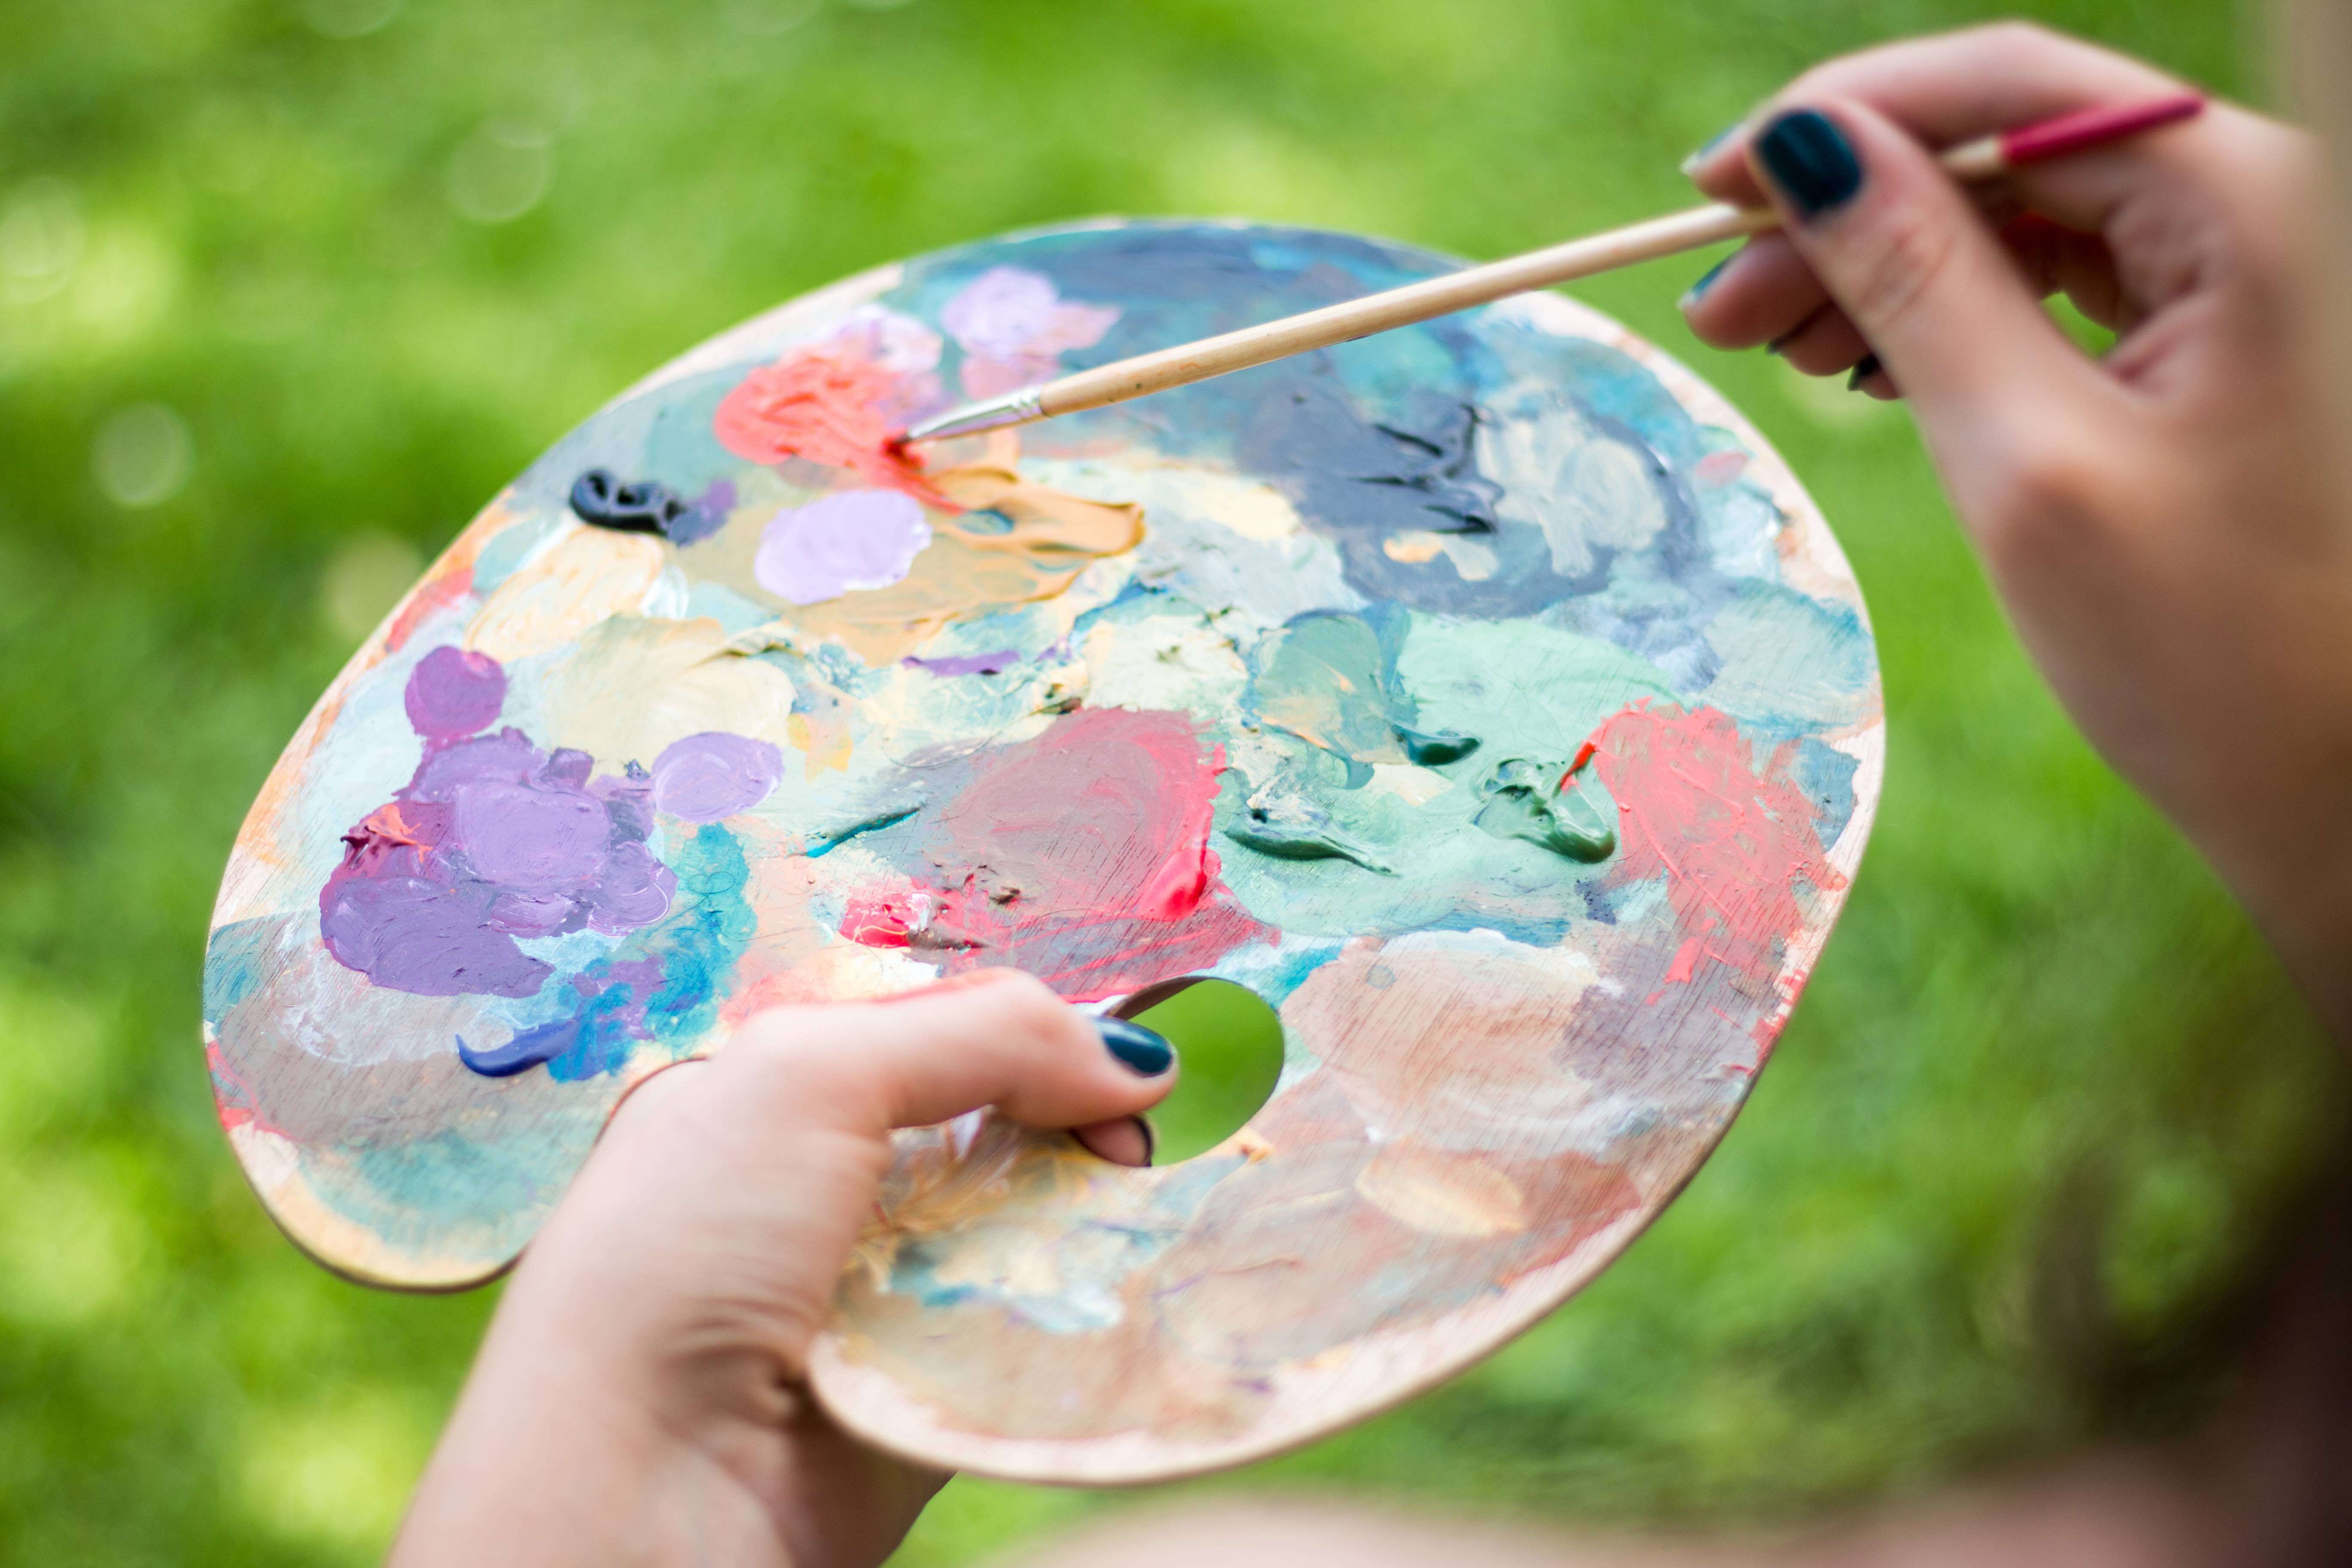 Woman artist painting outside and holding a palette of colorful paints in her hand.